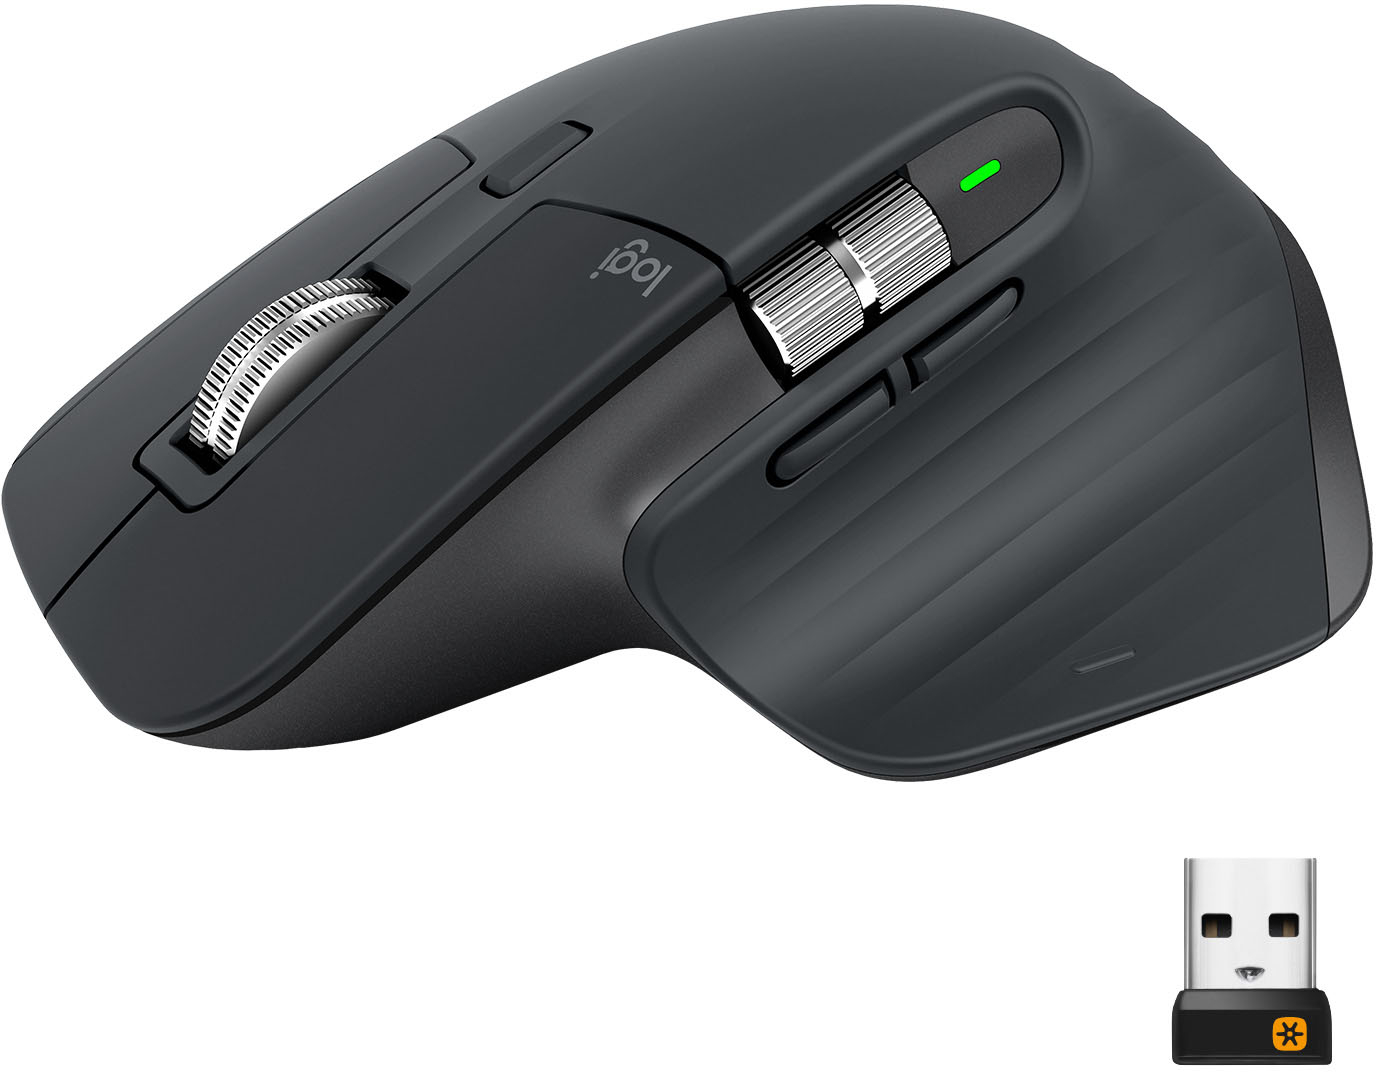 Zoom in on Front Zoom. Logitech - MX Master 3 Advanced Wireless USB/Bluetooth Laser Mouse with Ultrafast Scrolling - Black.